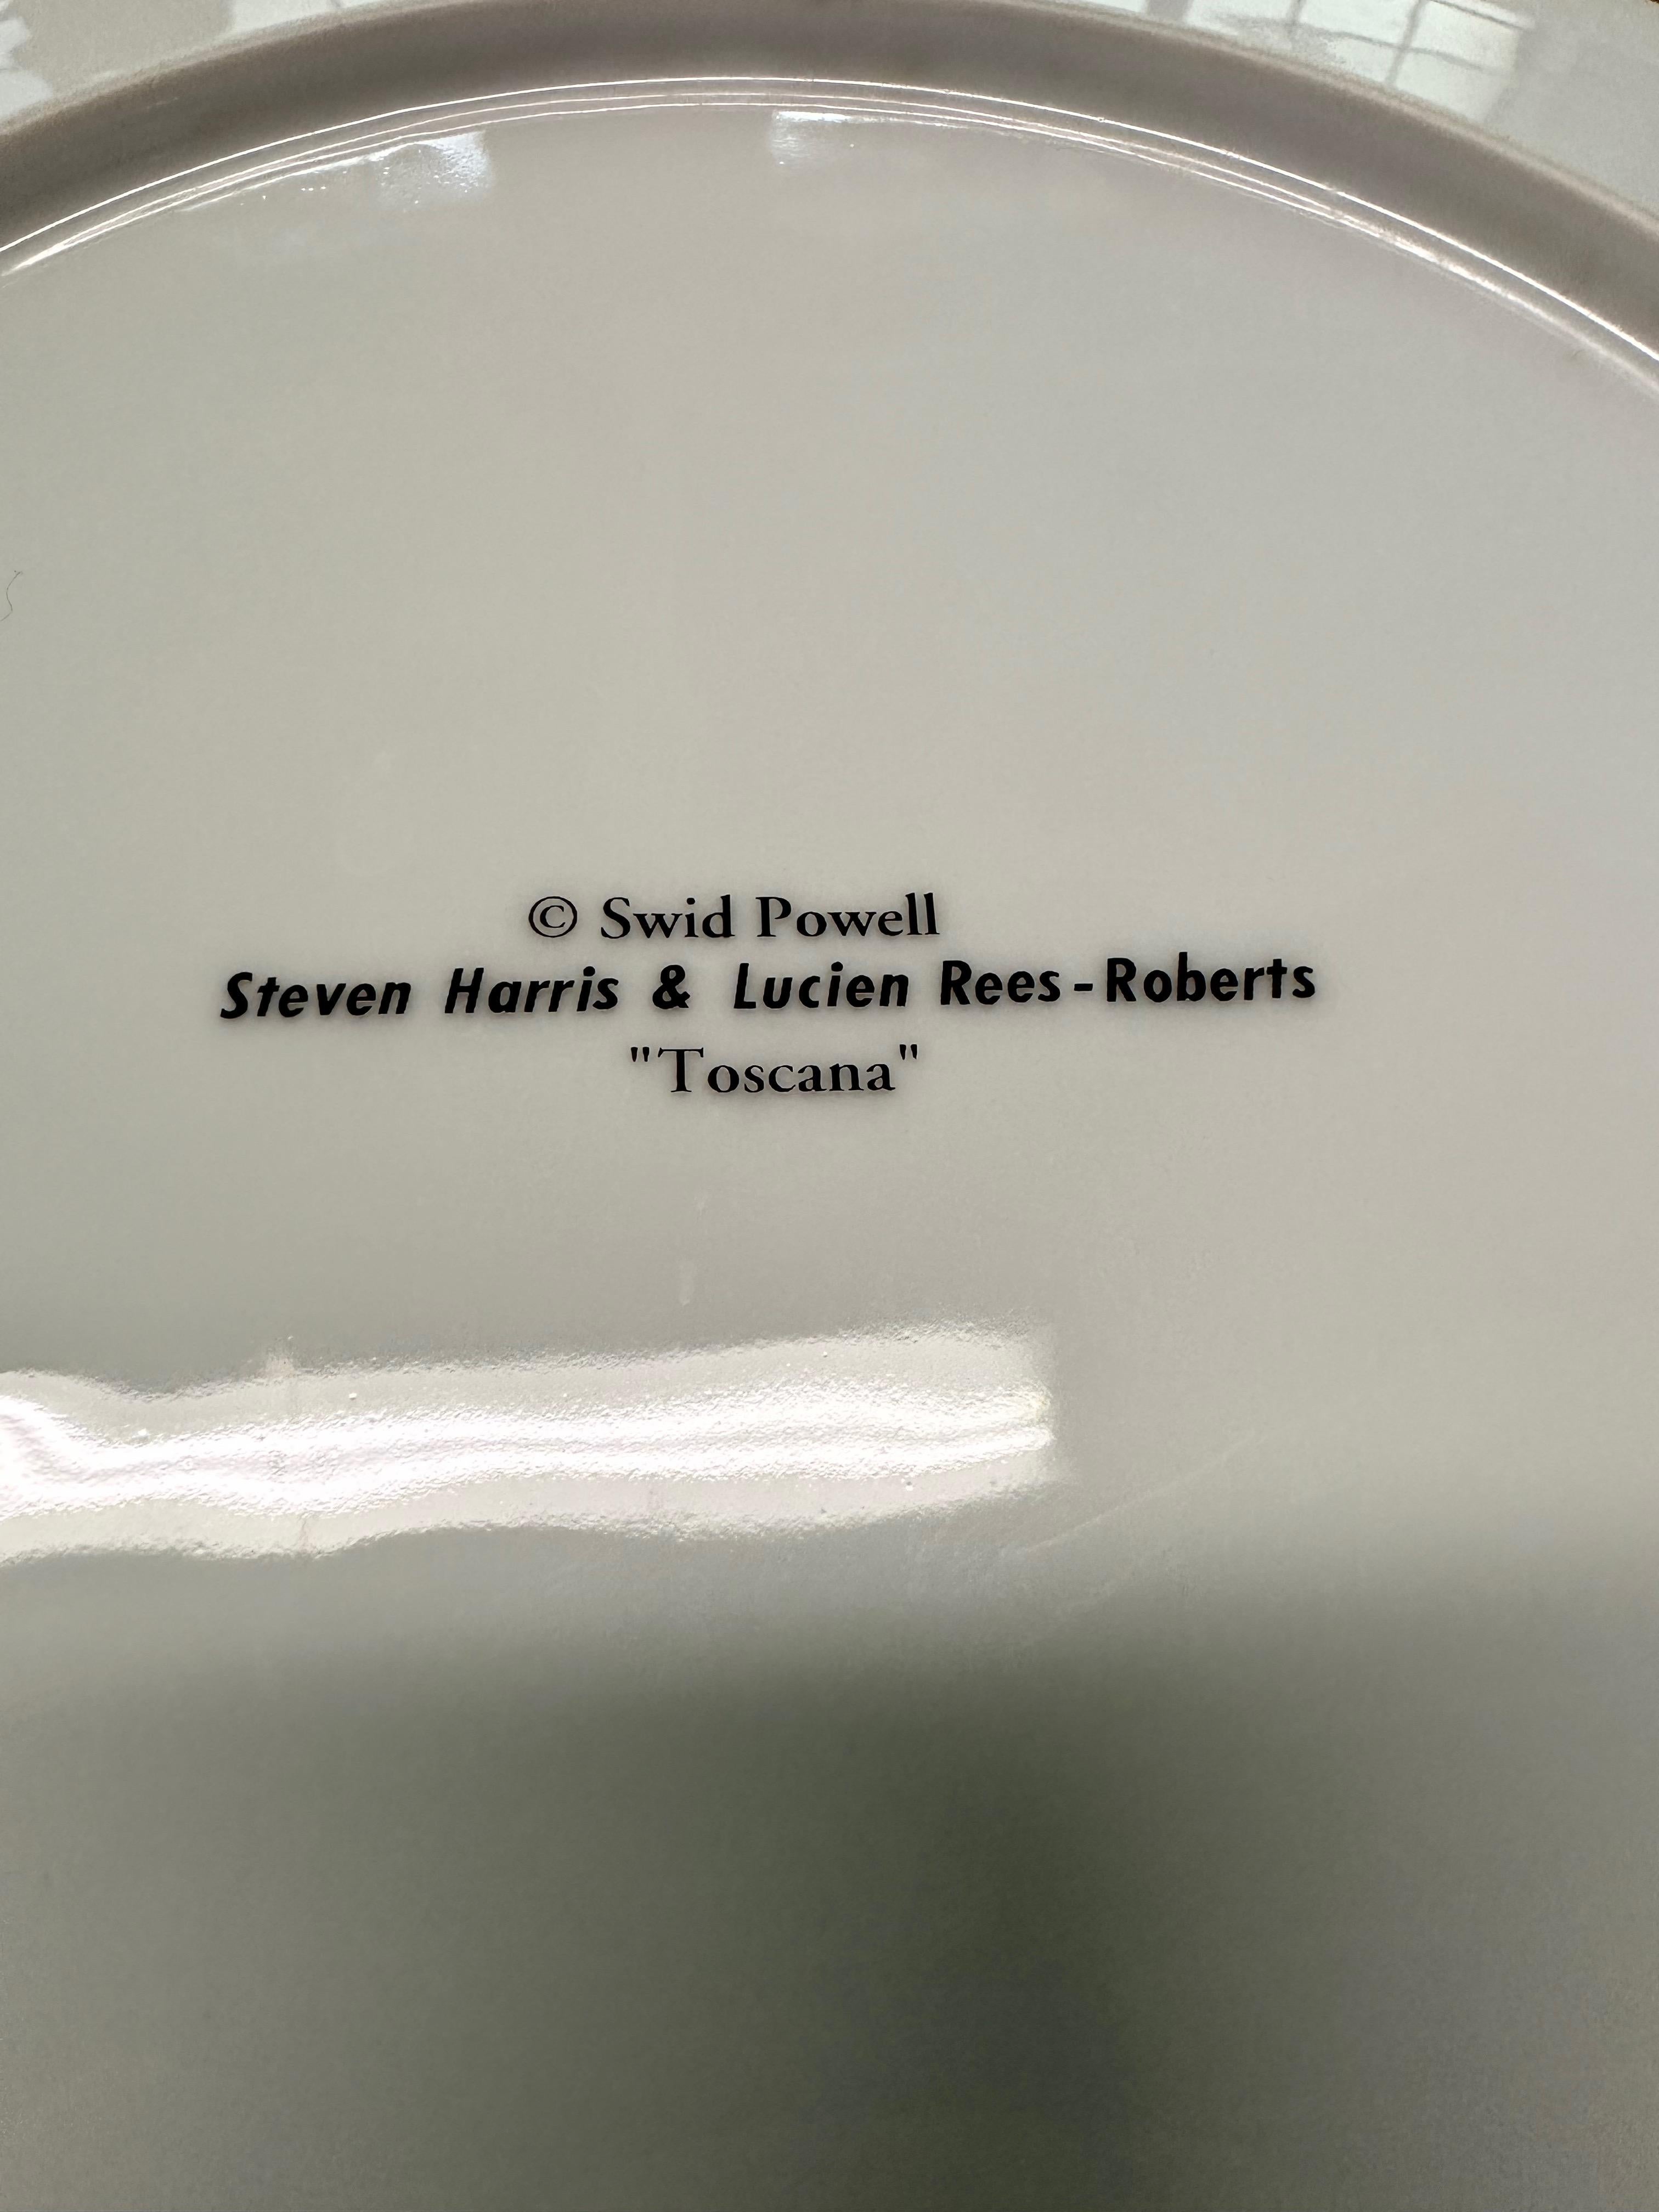 Porcelain Swid Powell Toscana Tableware Designed by Steven Harris & Lucien Ress-Roberts For Sale